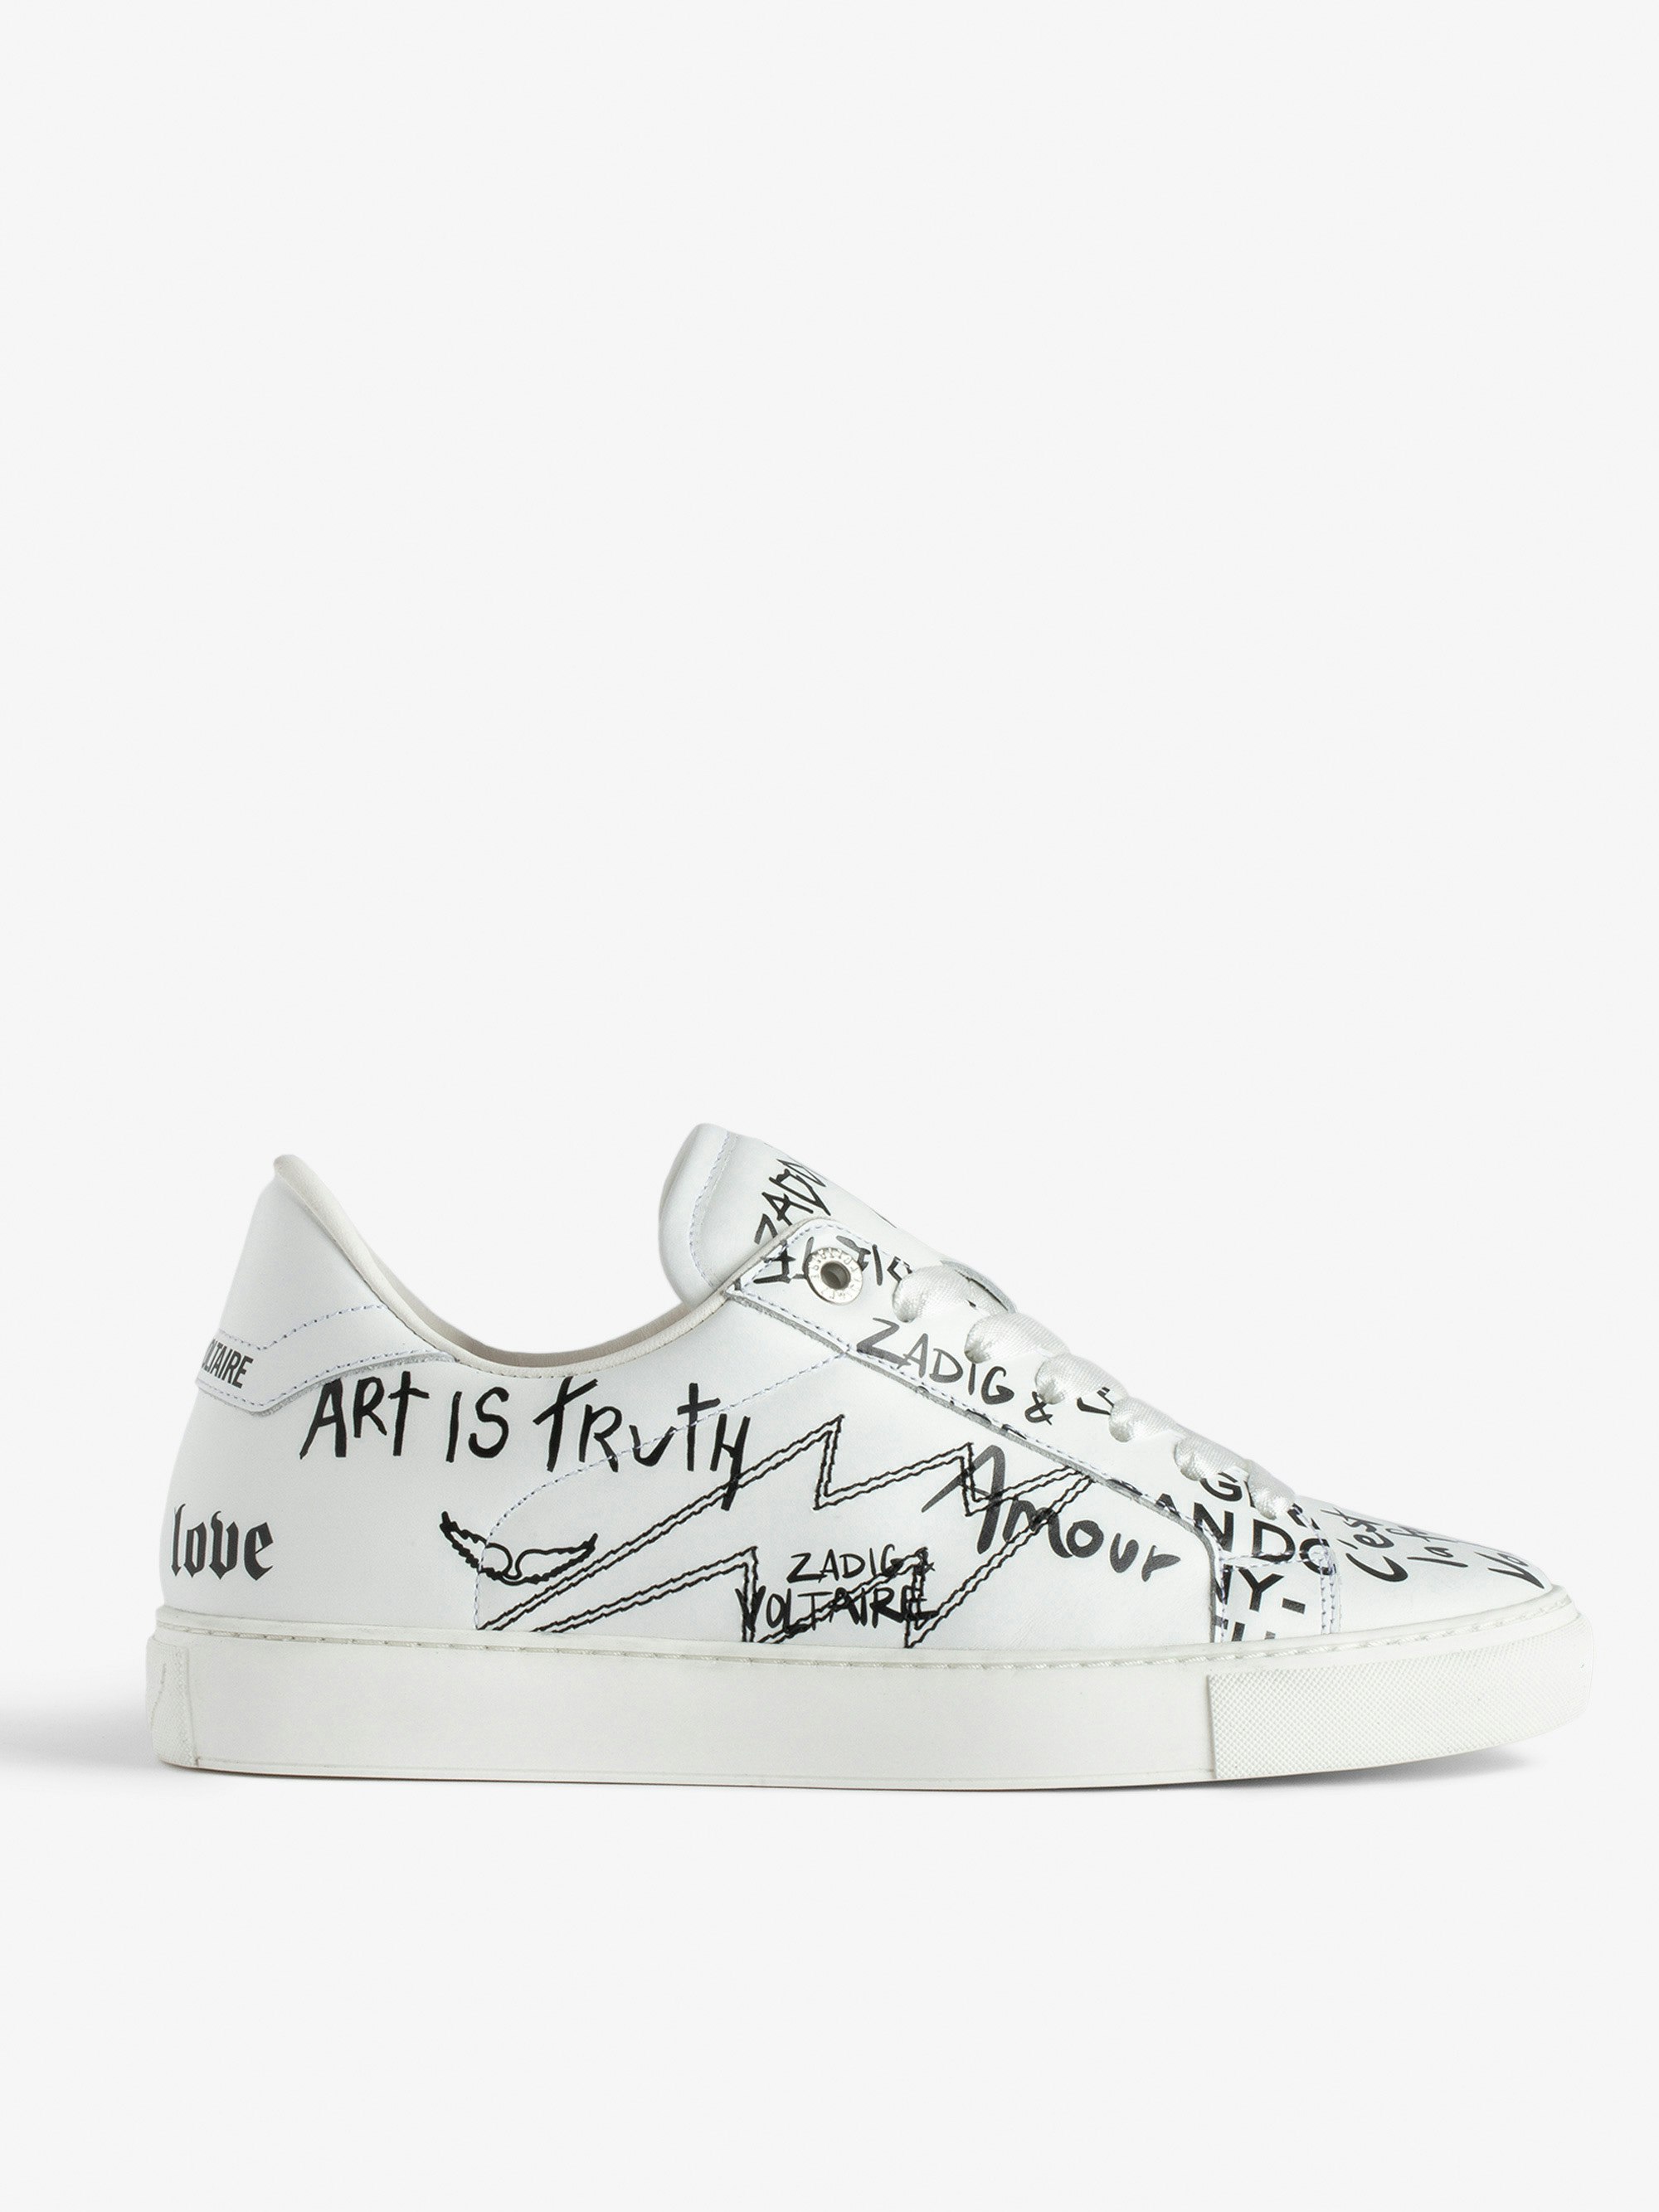 ZV1747 La Flash Low-Top Trainers - Women’s white smooth leather low-top trainers with lightning bolt panels and graffiti.